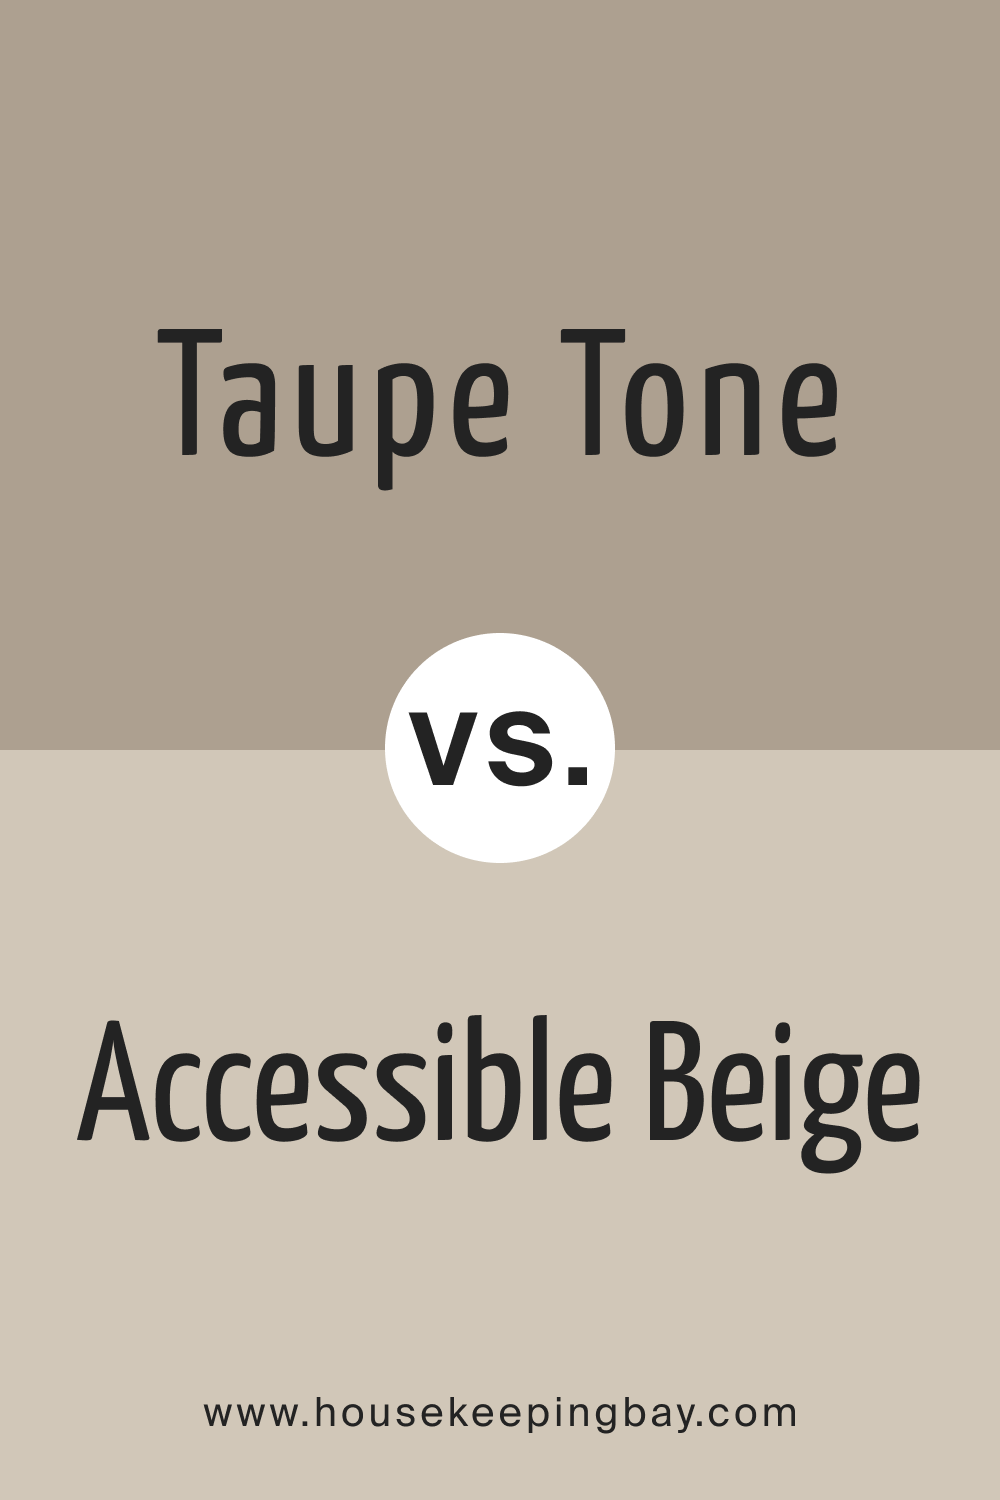 Taupe Tone vs. Accessible Beige